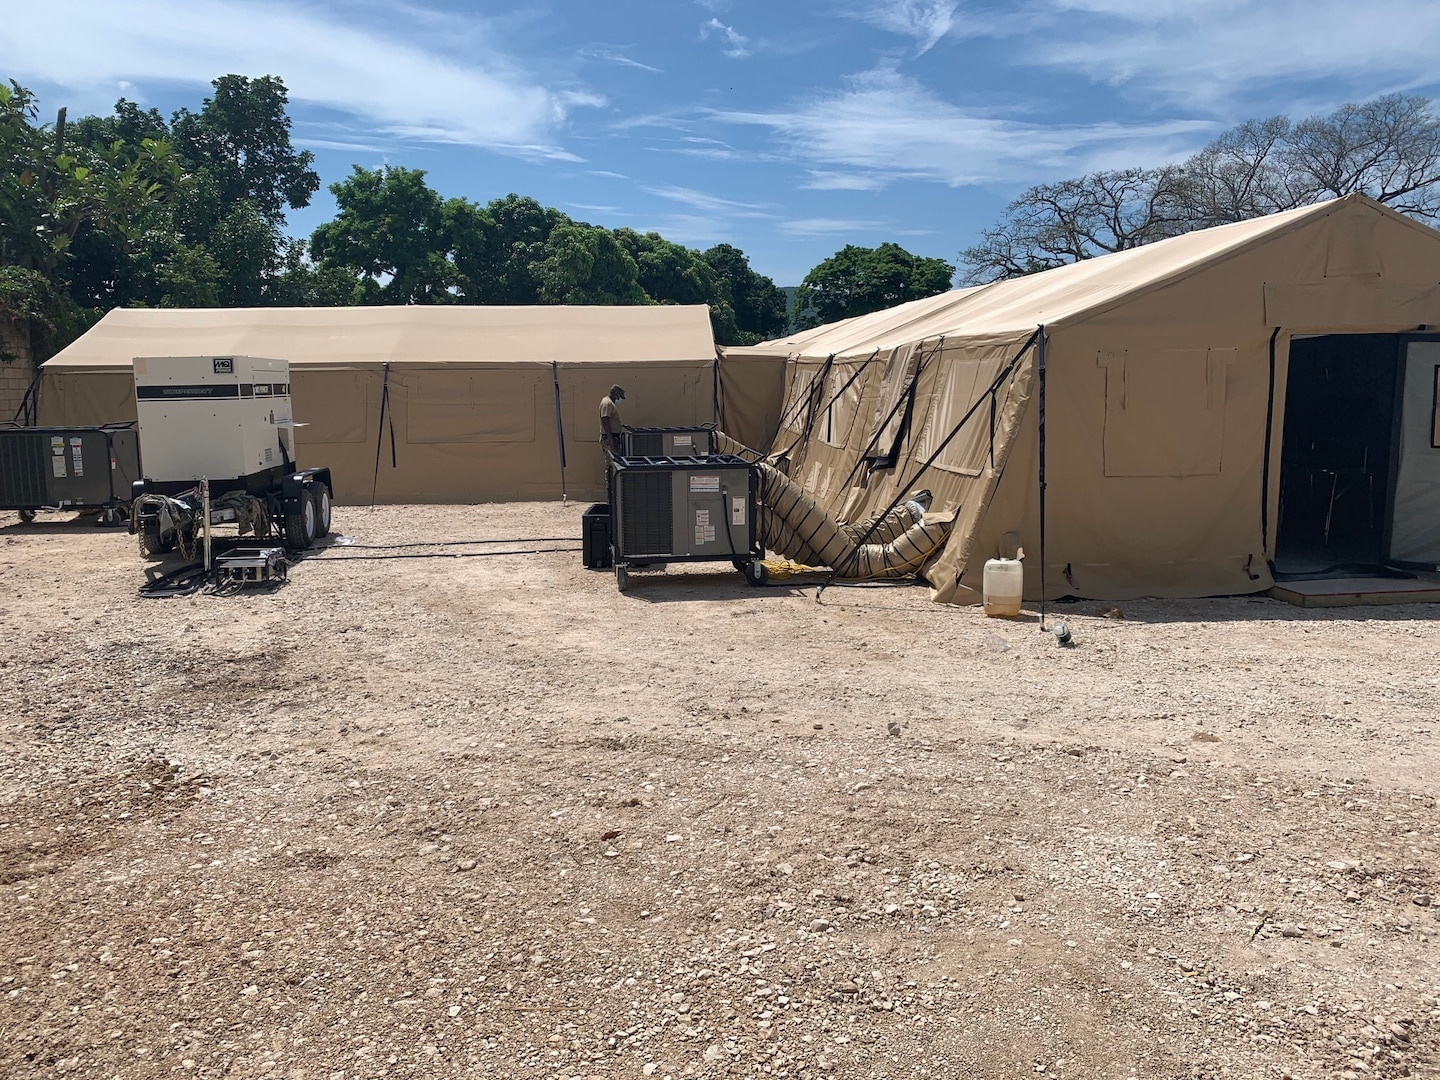 Two tan tent structures with support equipment outside are set up in a dirt field.